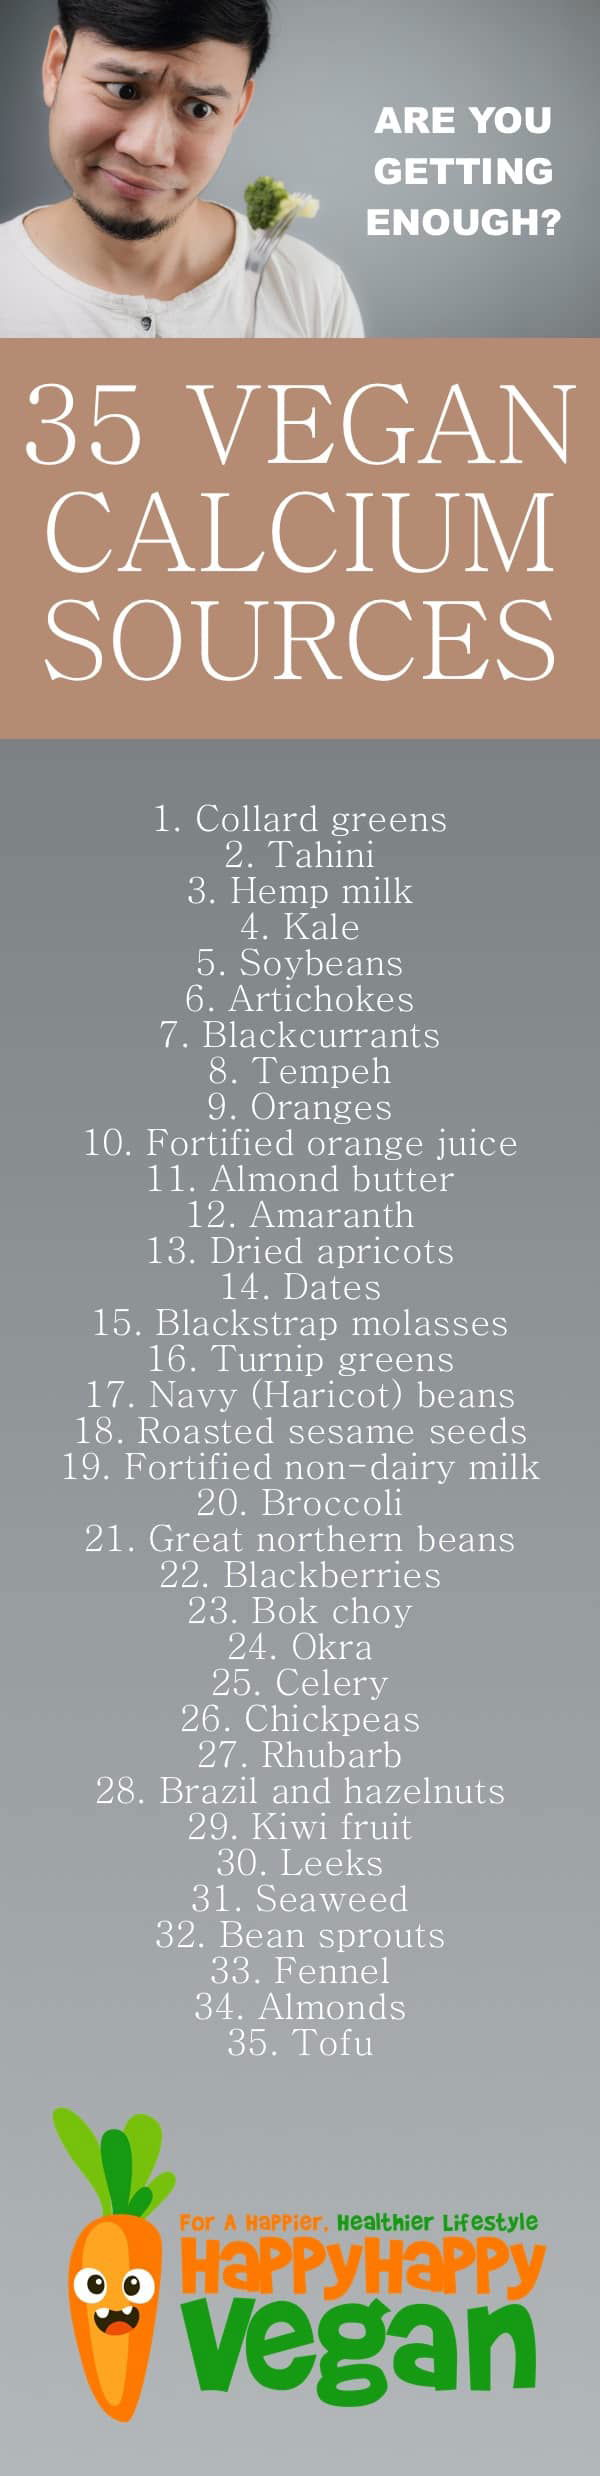 35 Vegan Calcium Sources Are You Getting What You Need 8391